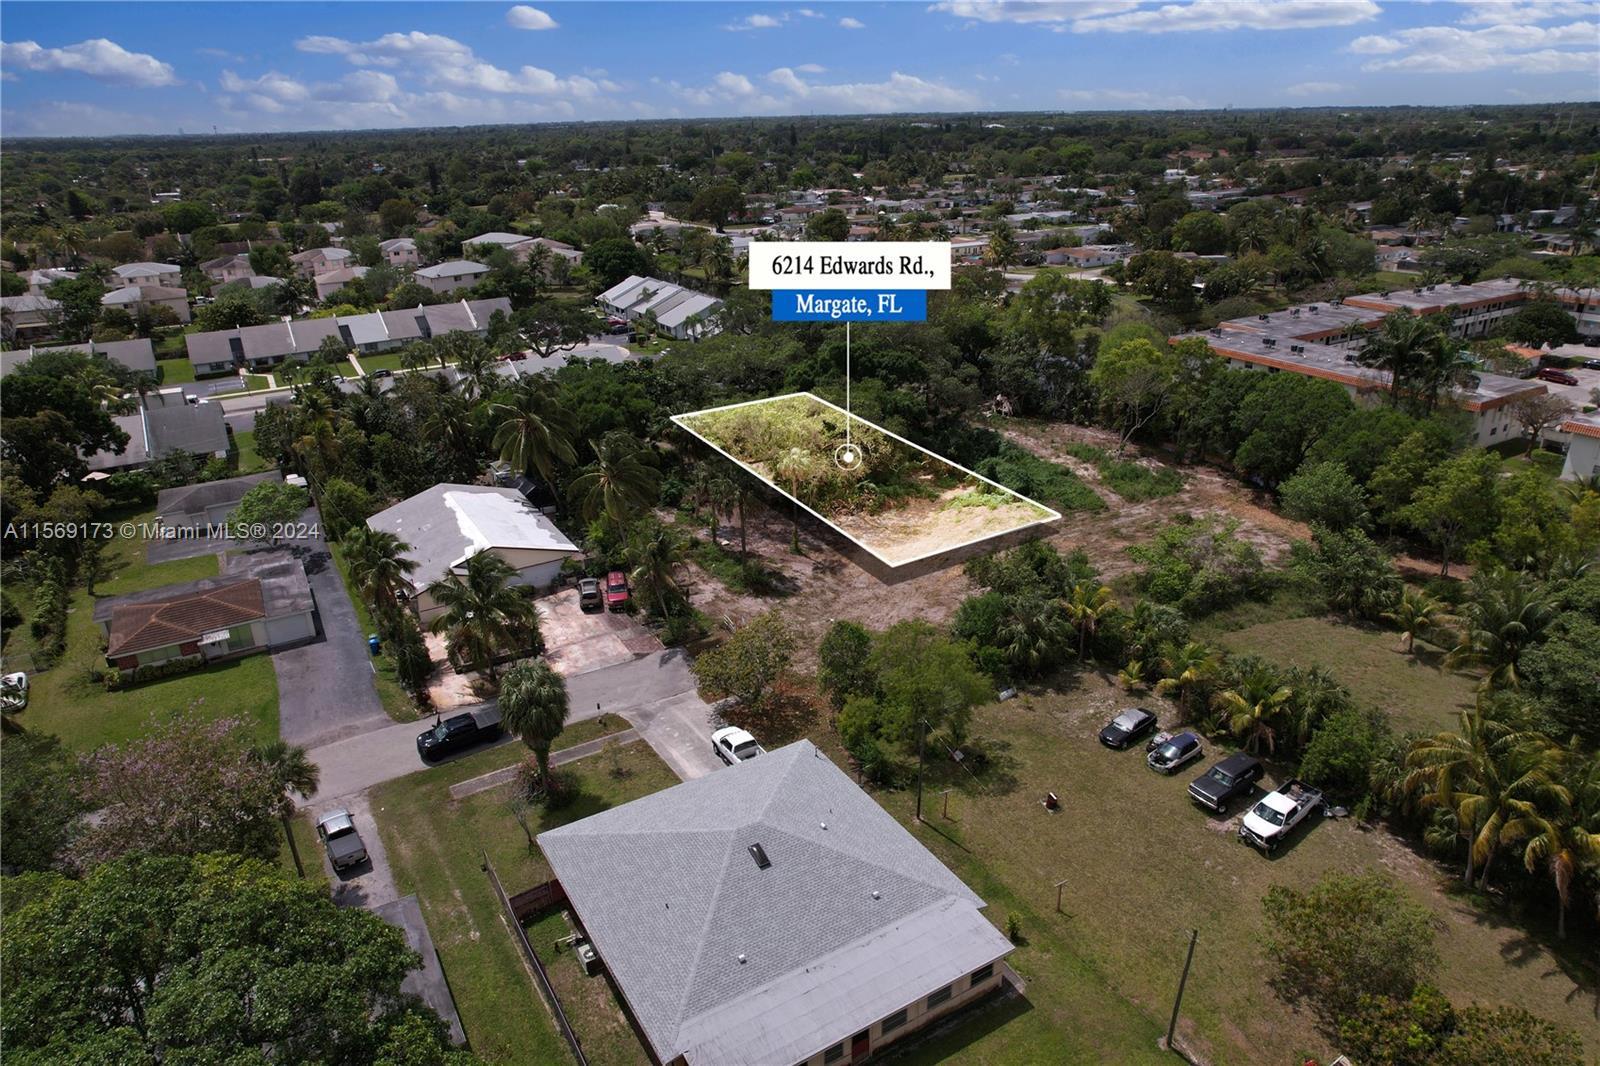 Photo of 6214 Edwards Rd in Margate, FL